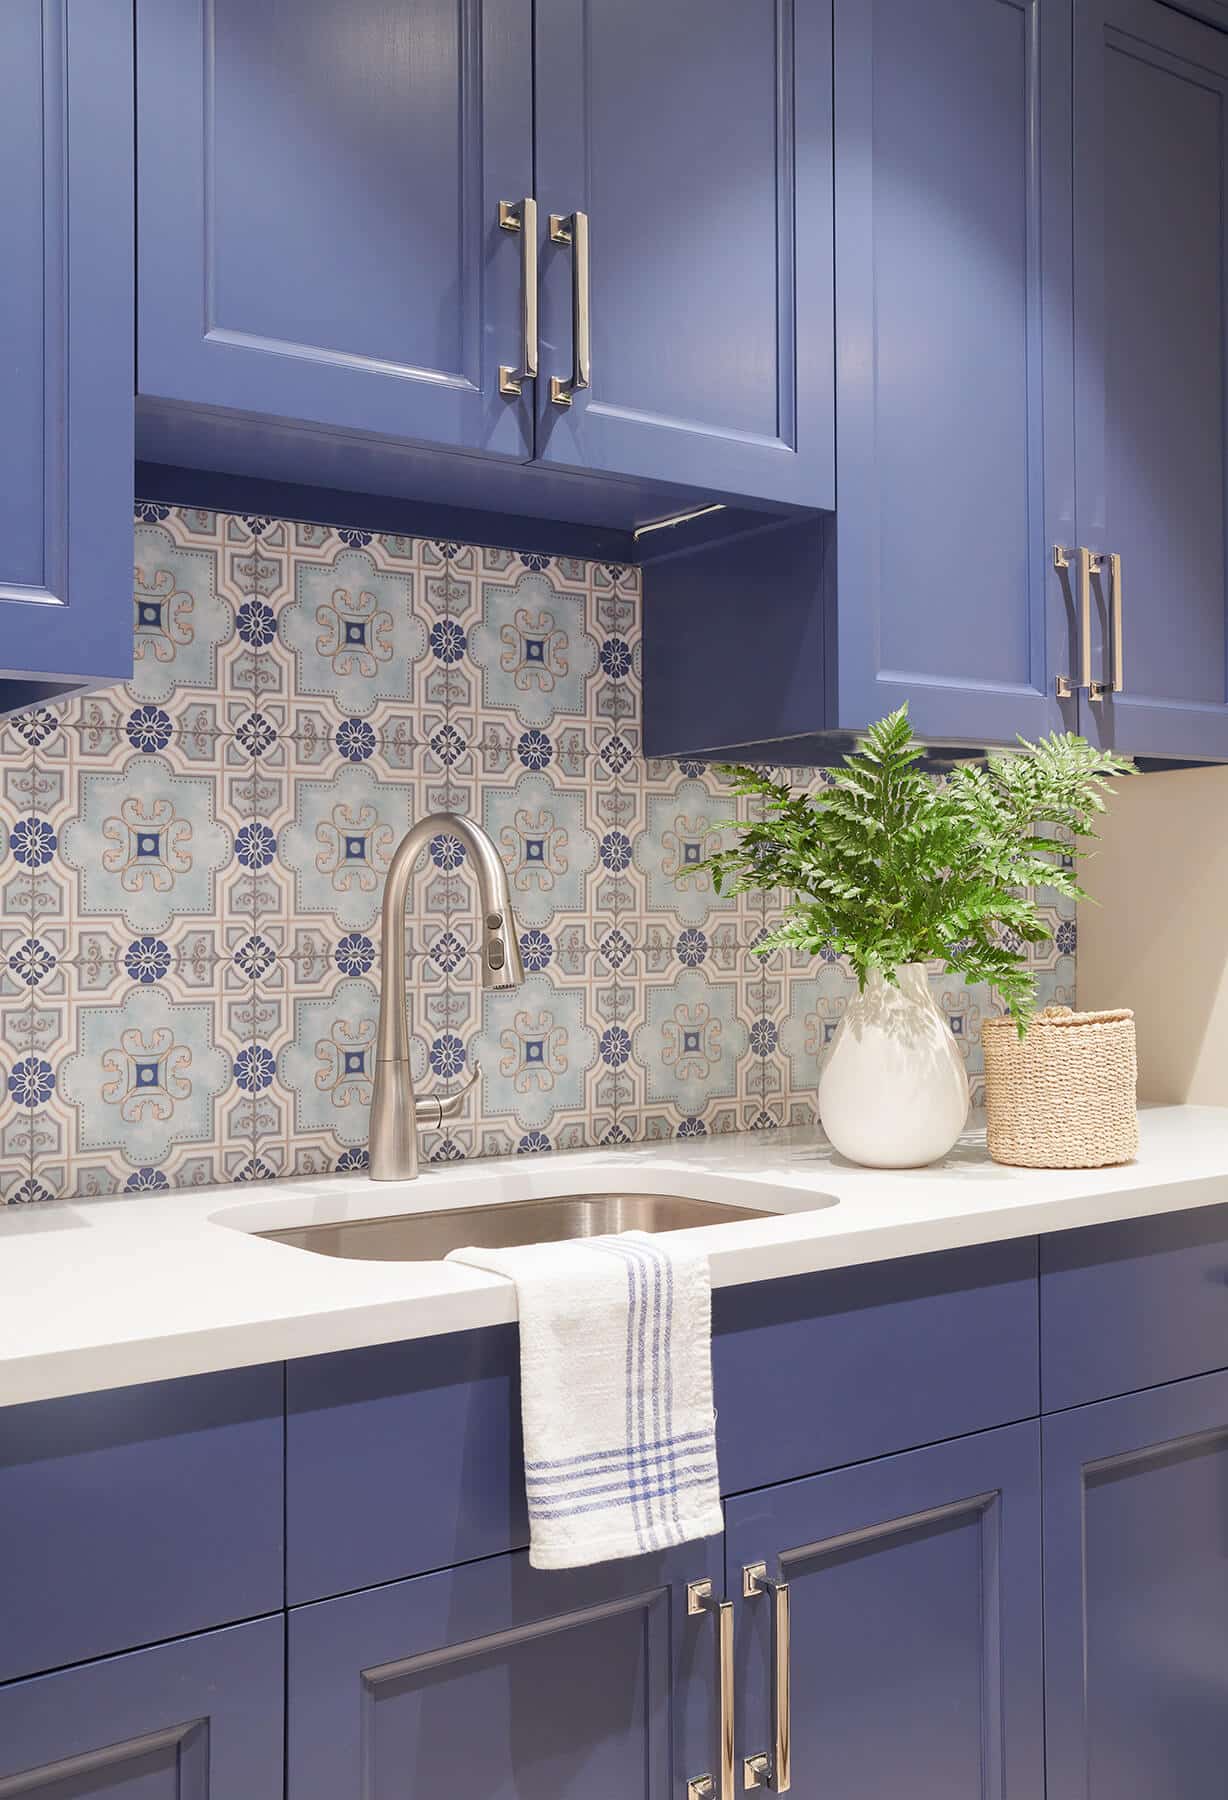 Nantucket, laundry room sink, counter, and cabinets